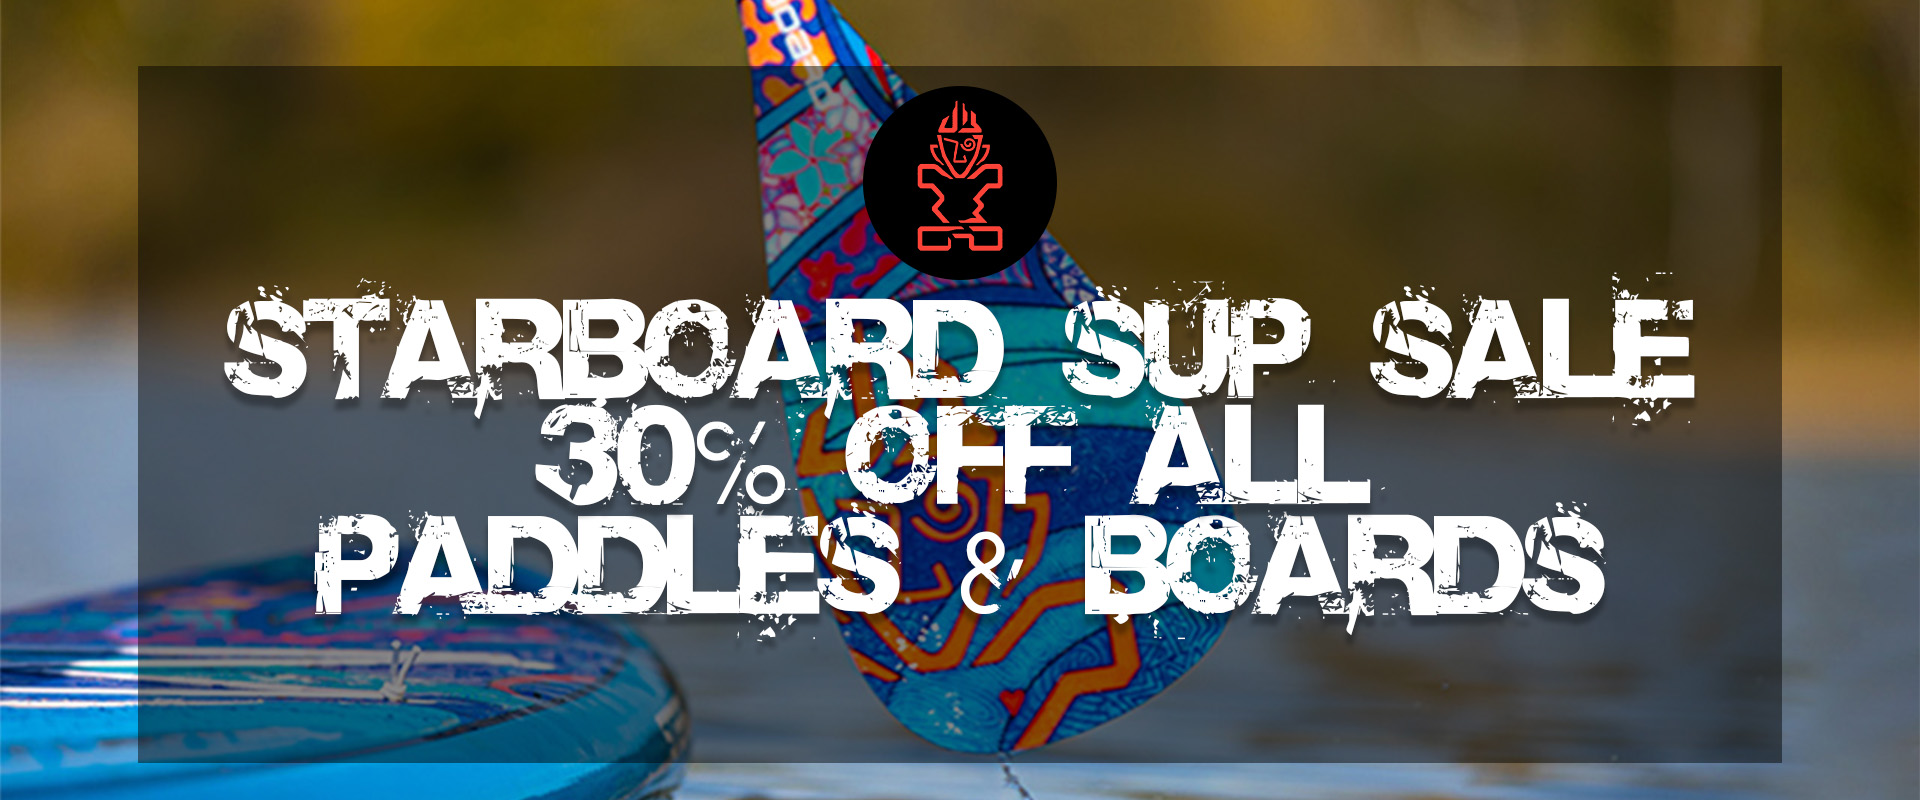 Starboard SUP Sale